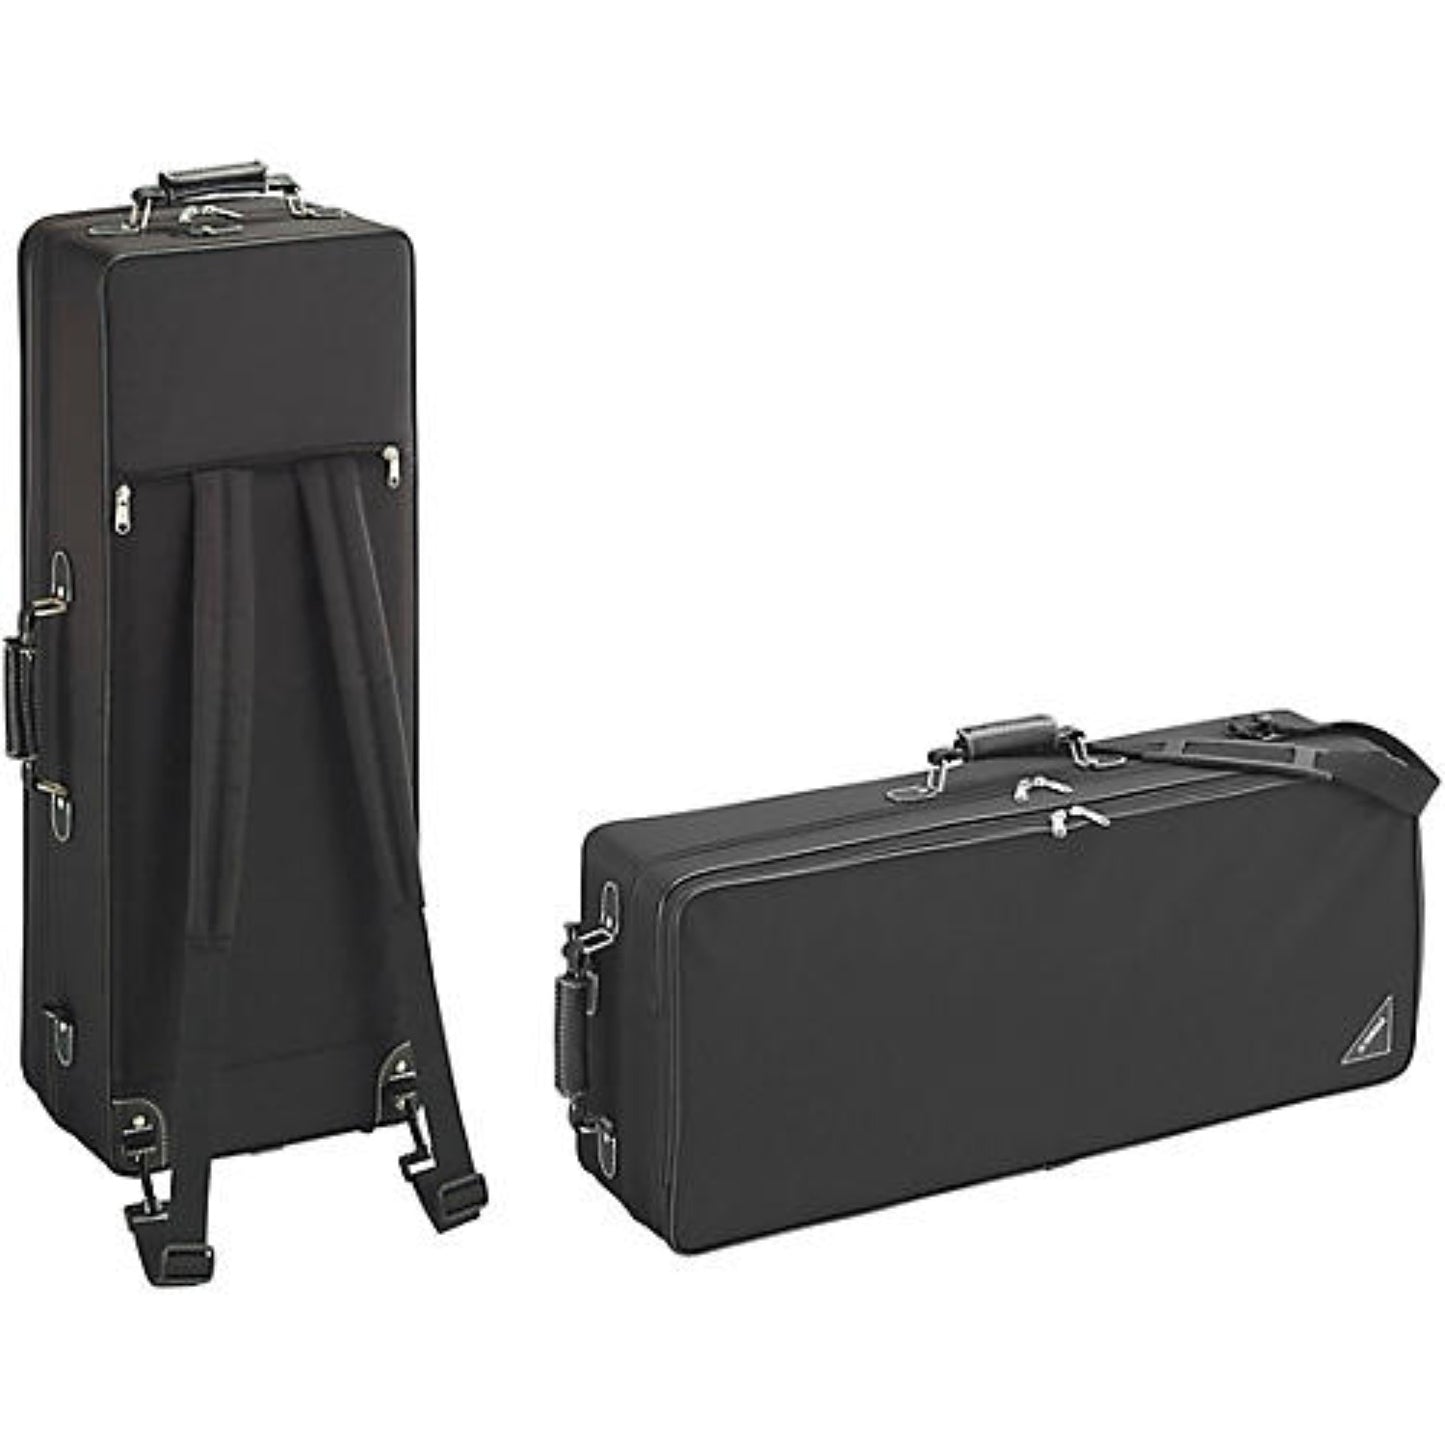 front and back view of black-covered Yamaha backpack alto sax cases on white background